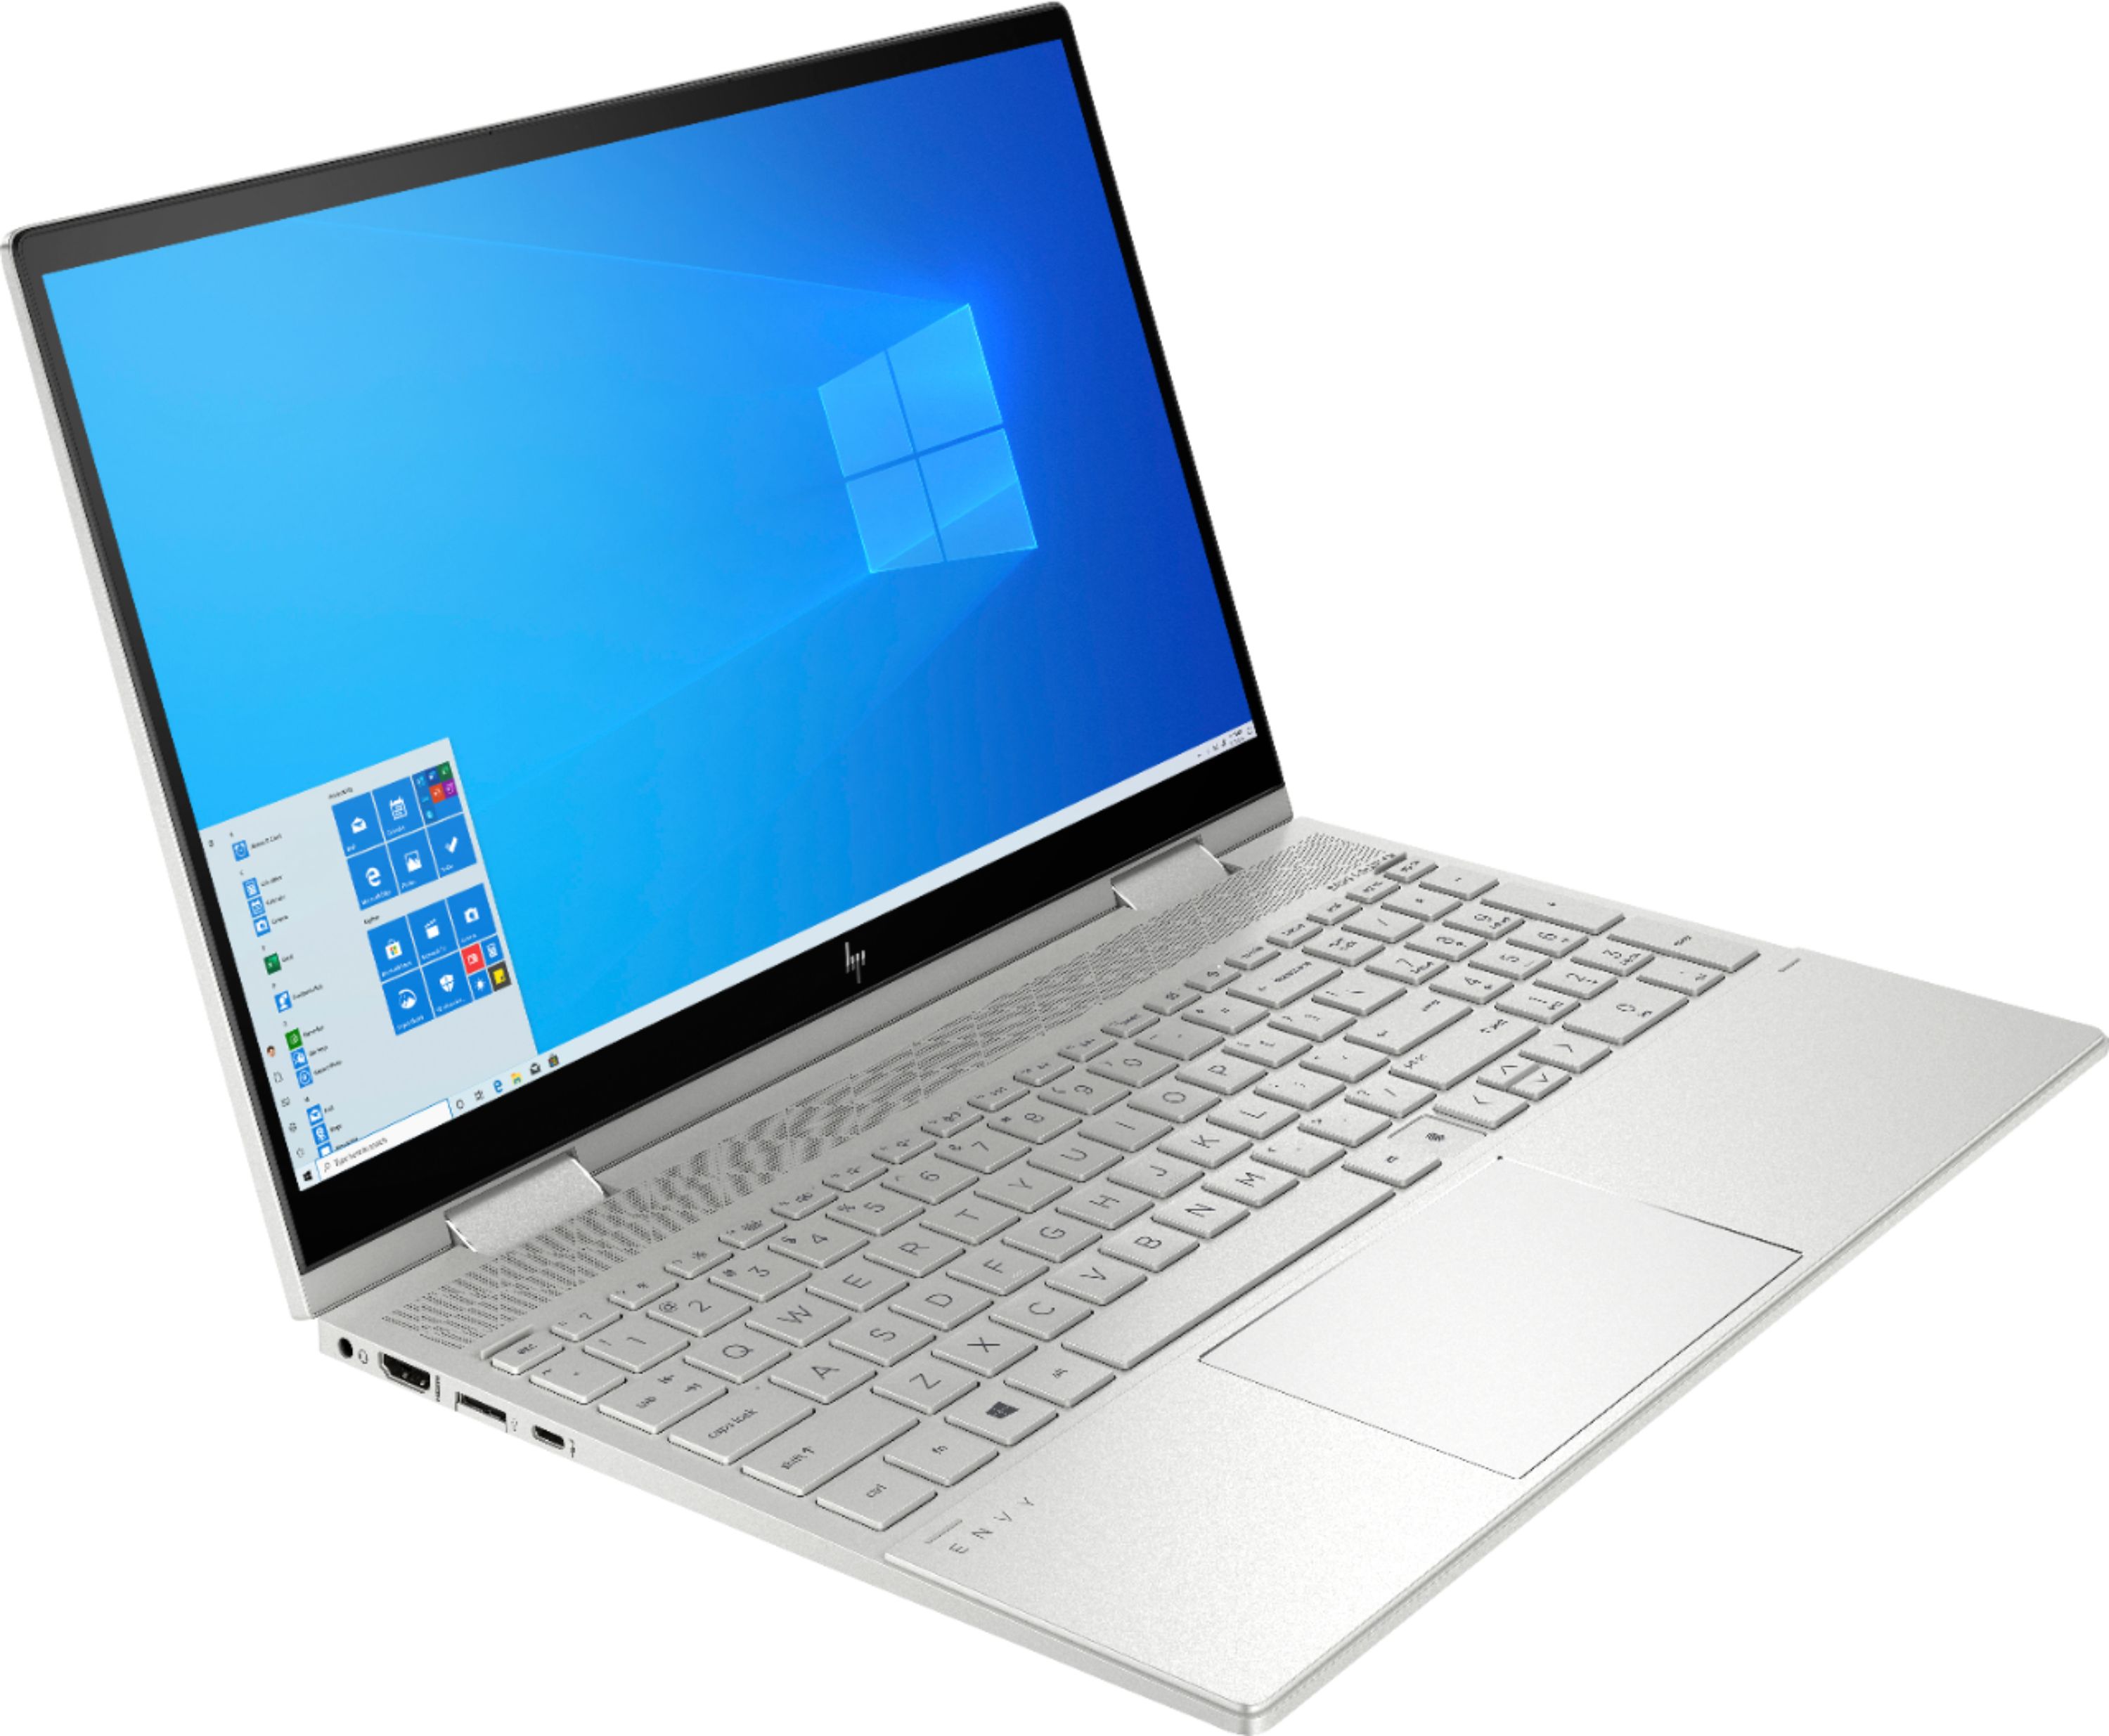 Angle View: HP - ENVY x360 2-in-1 15.6" Touch-Screen Laptop - Intel Core i5 - 8GB Memory - 256GB SSD - Natural Silver